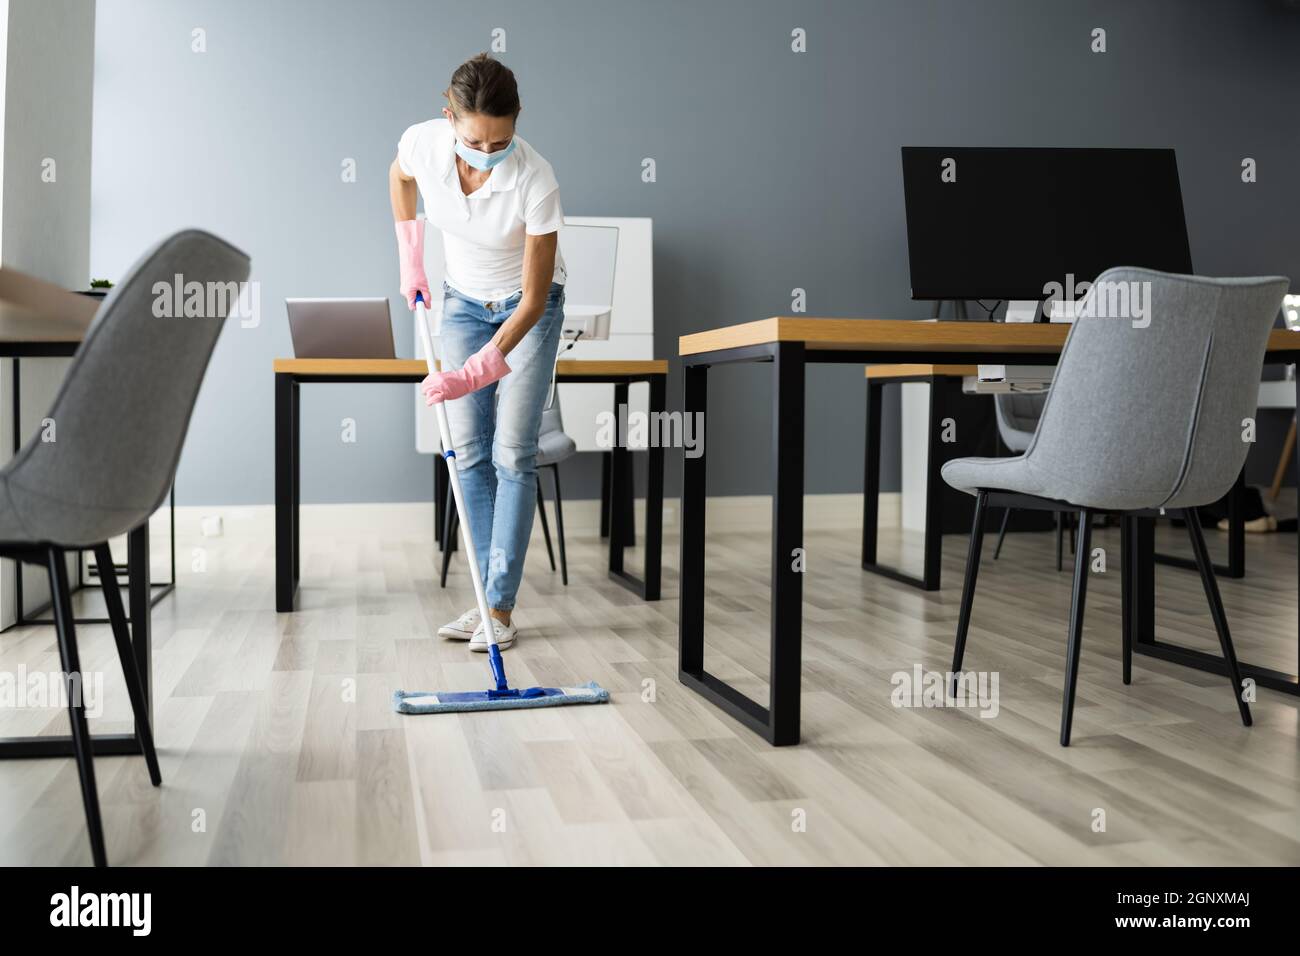 Female Janitor Mopping Floor In Face Mask In Office Stock Photo